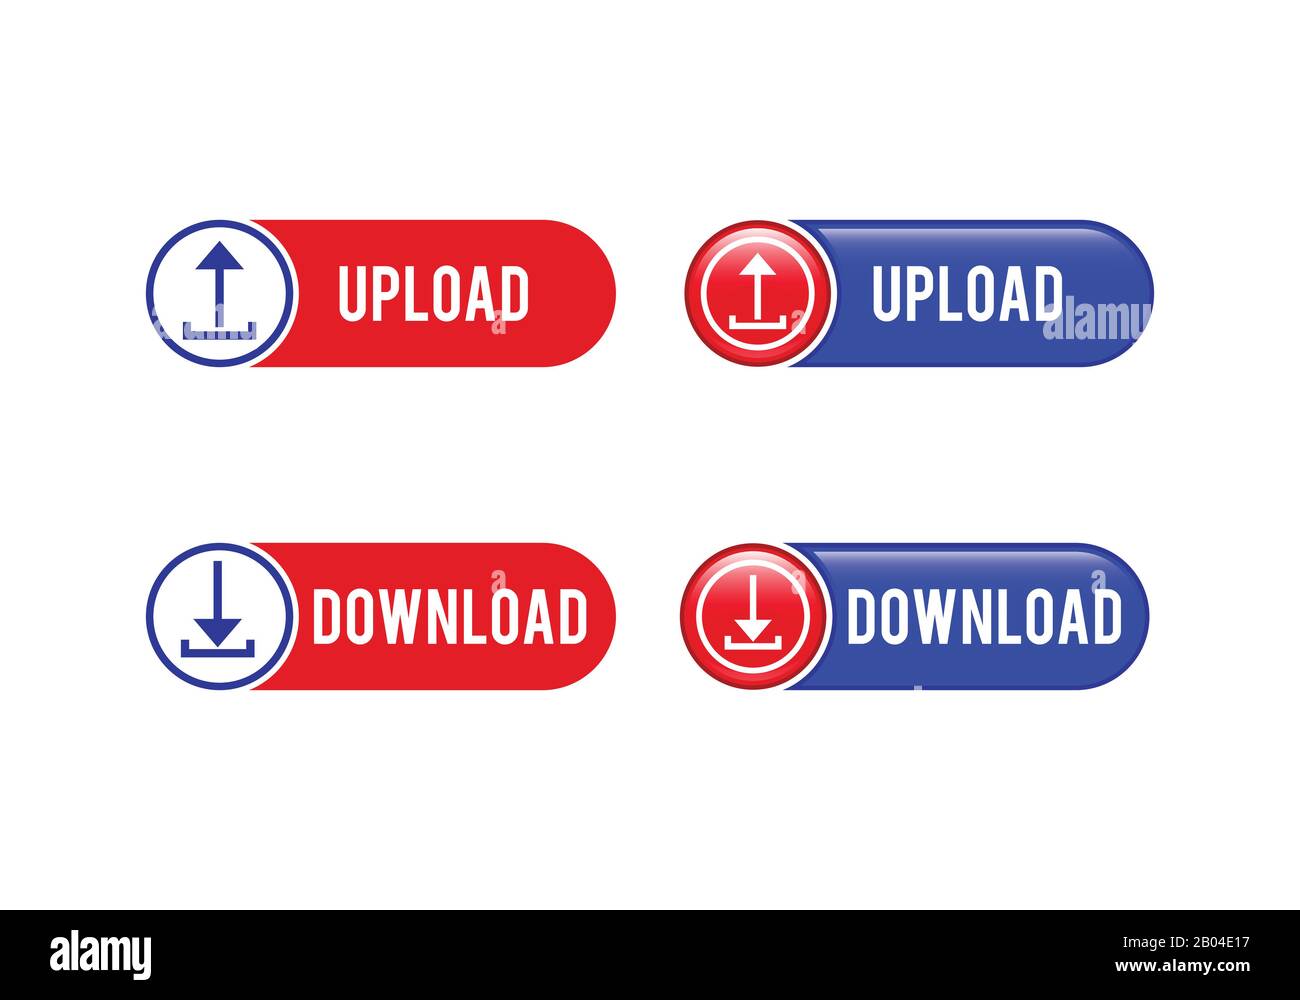 Download and upload buttons useful for web design purposes Stock Vector